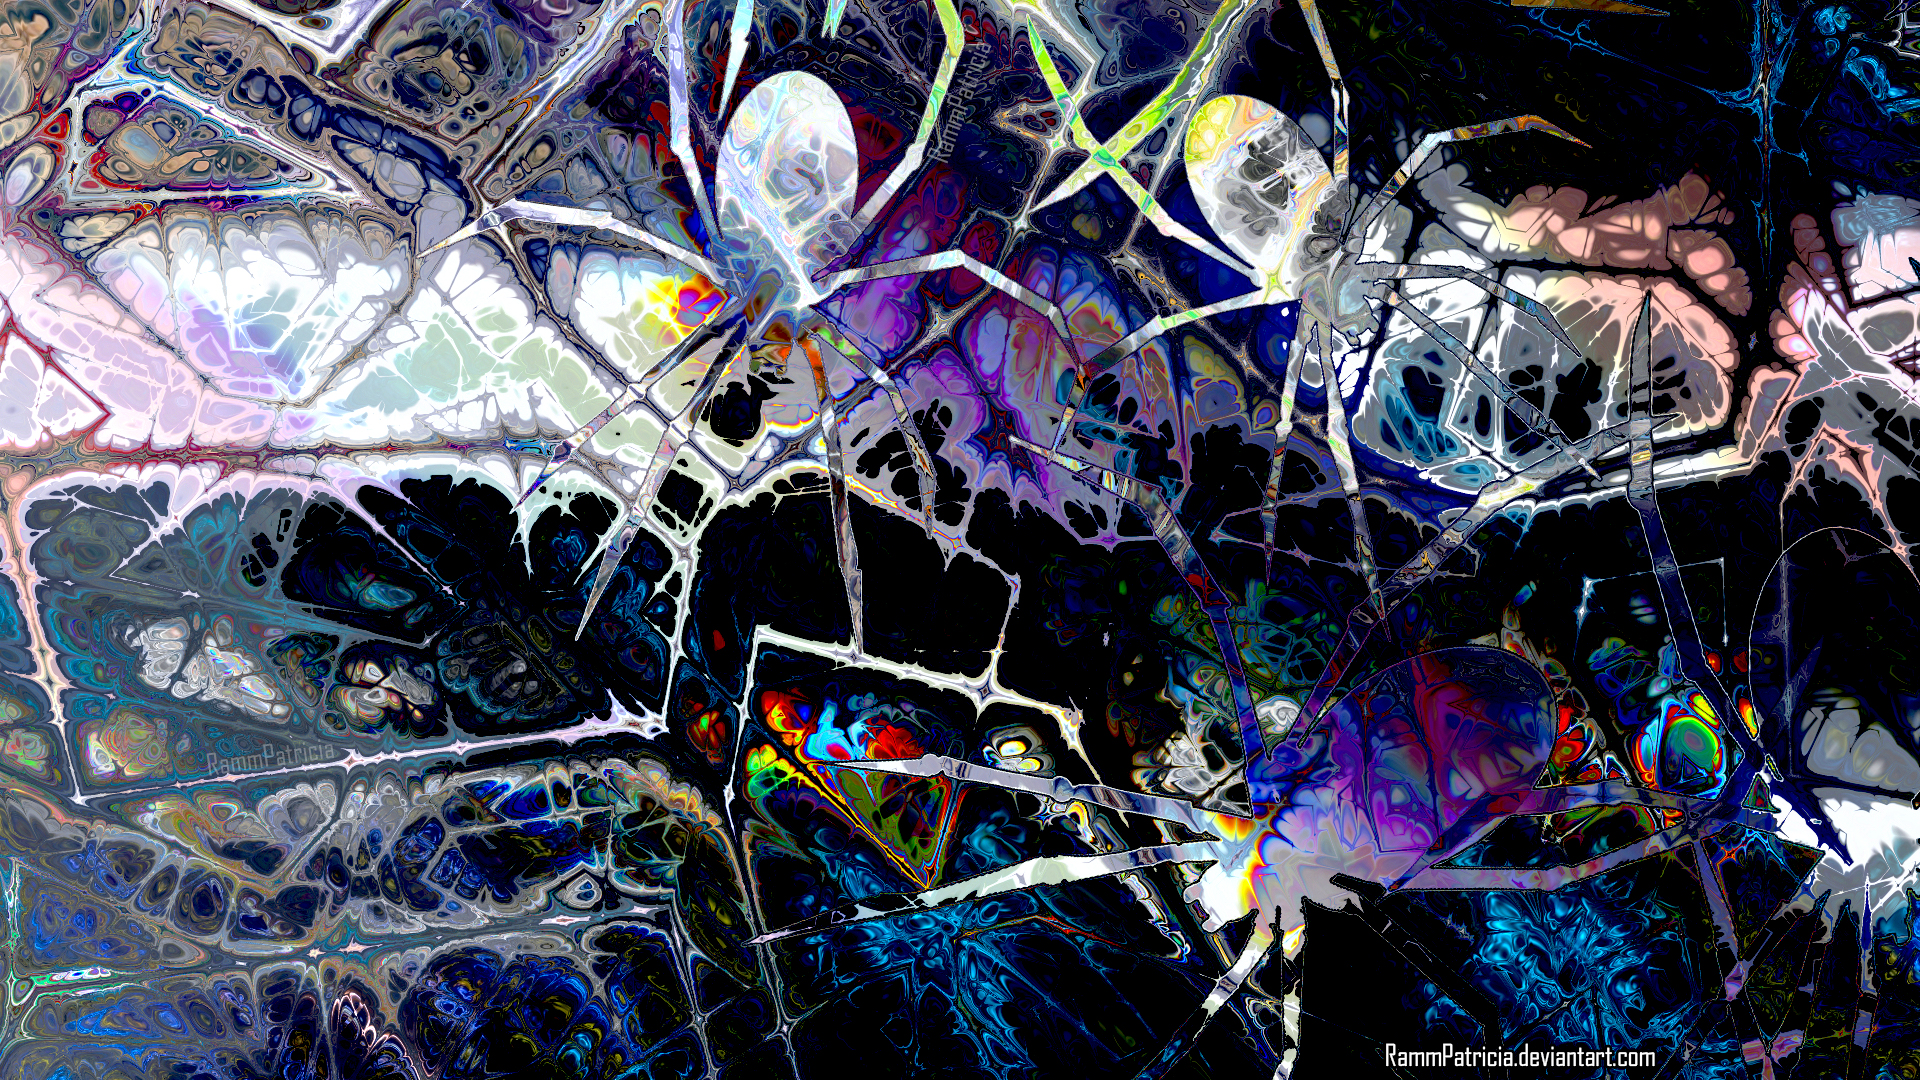 General 1920x1080 RammPatricia digital art abstract colorful spider tarantula iridescent watermarked trippy psychedelic